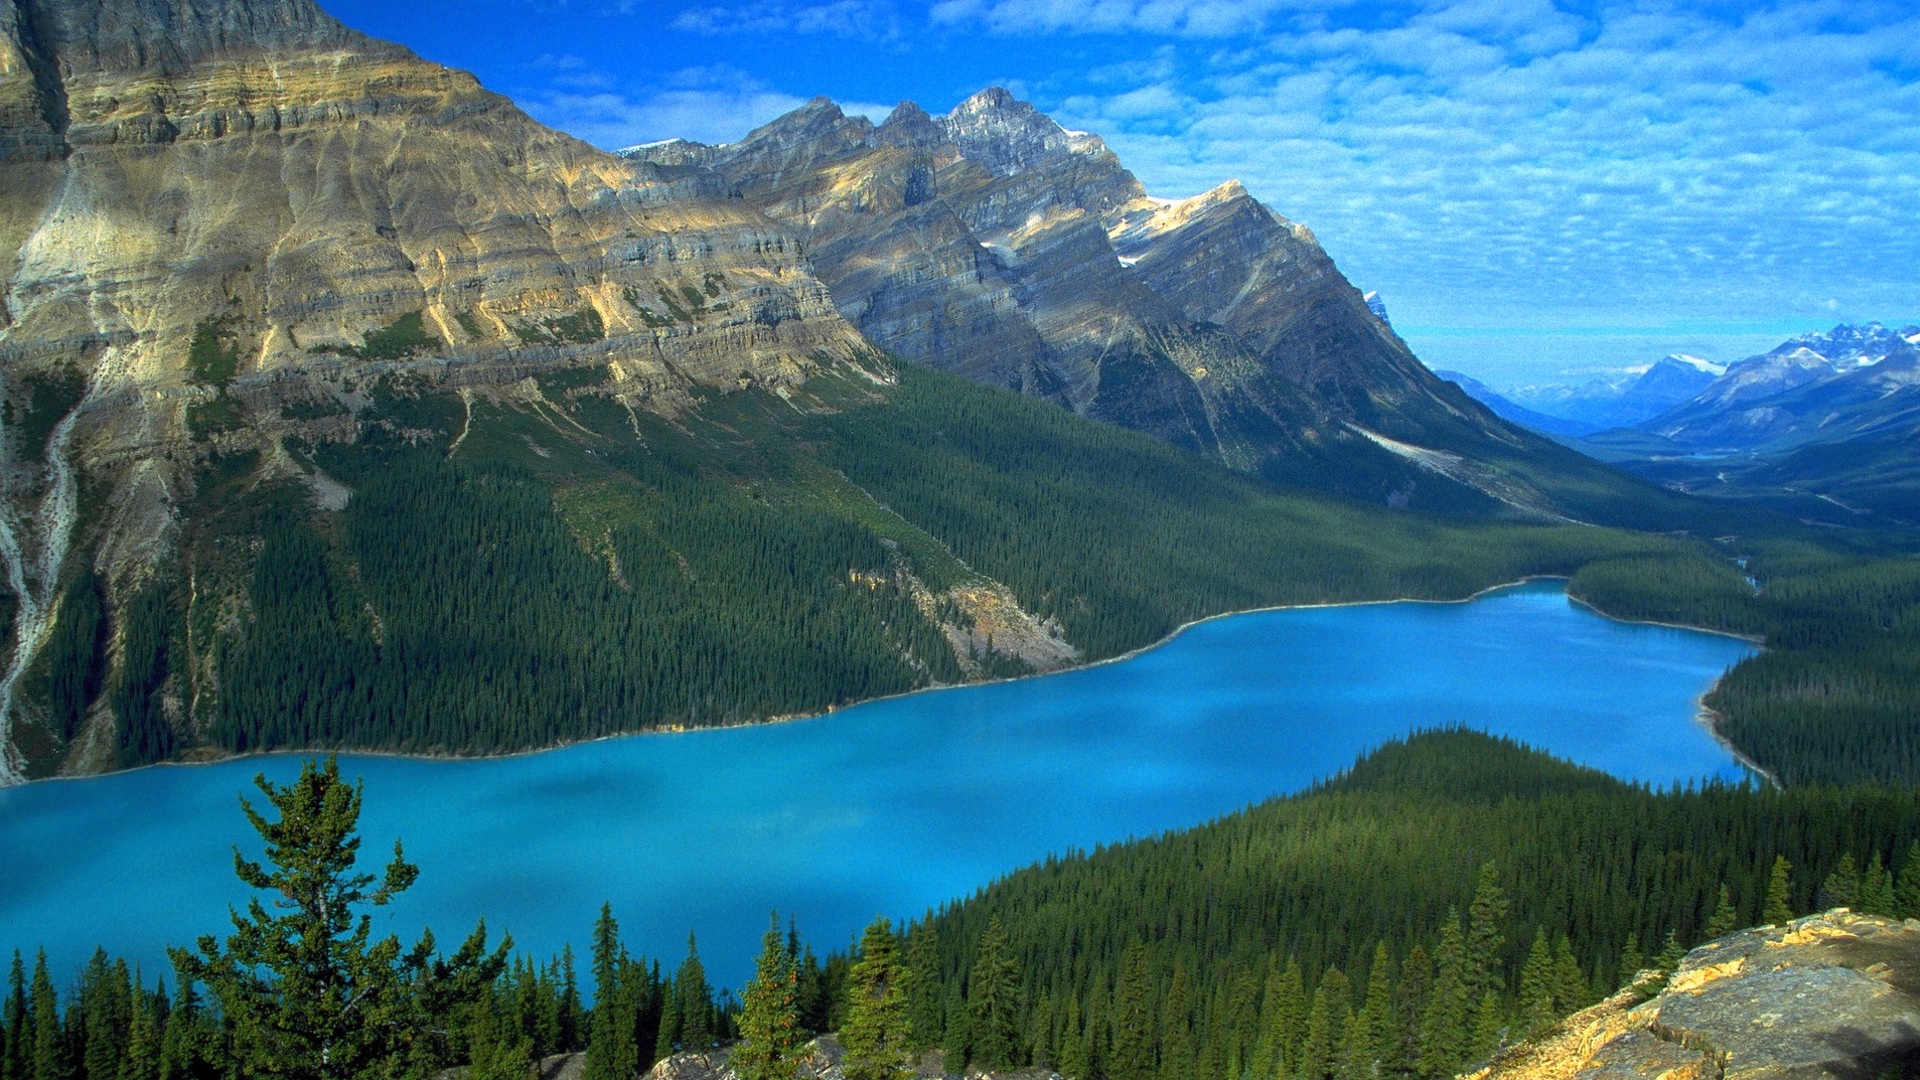 General 1920x1080 mountains lake forest landscape Peyto Lake Canada trees water sky clouds nature Banff National Park